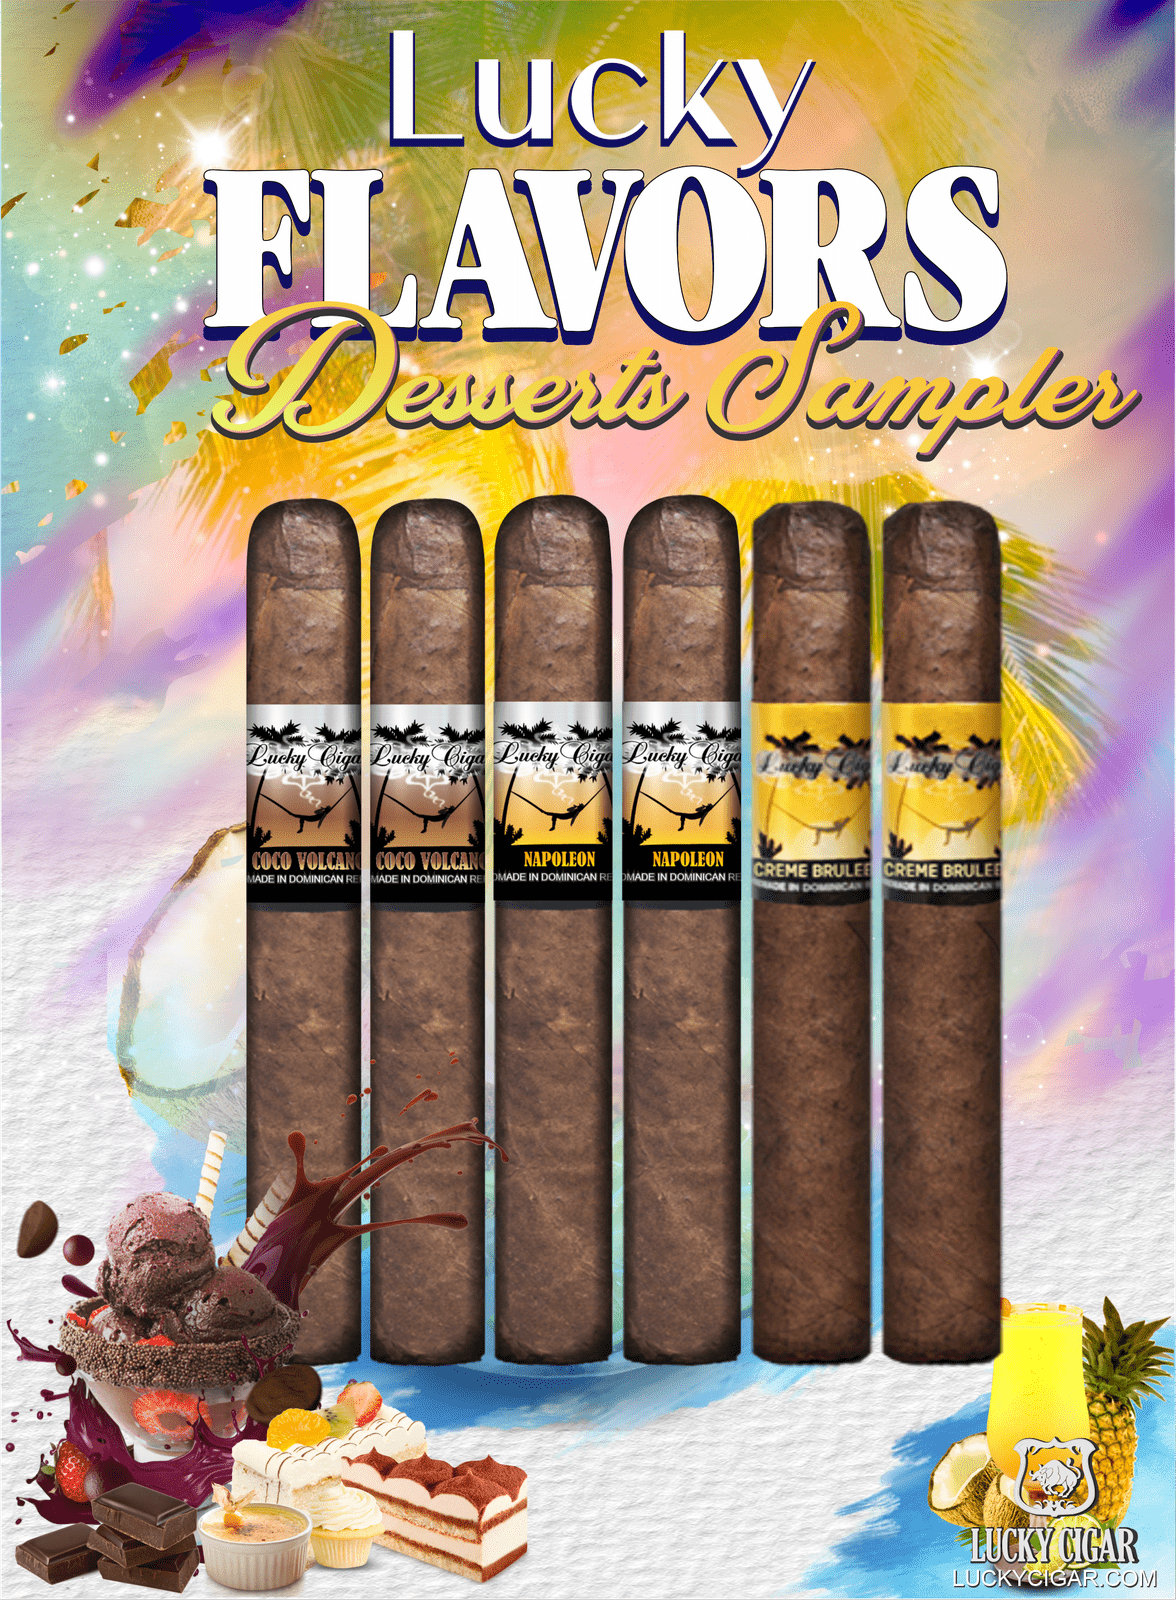 Flavored Cigars: Lucky Flavors 6 Piece Desserts Sampler - Coco, Napoleon, Creme Brulee